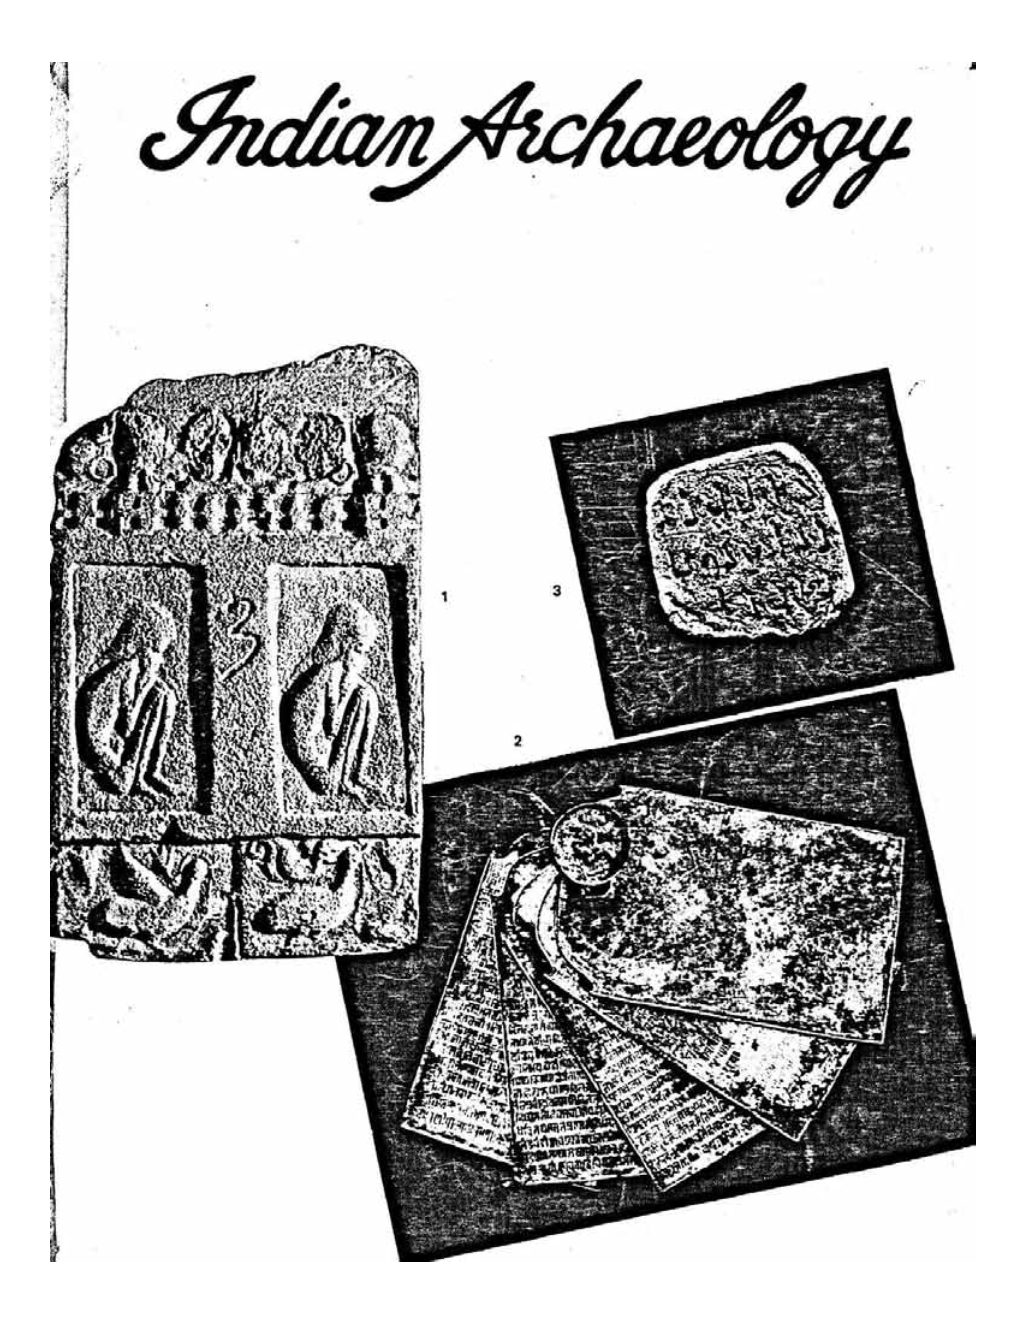 Indian Archaeology 1976-77 a Review